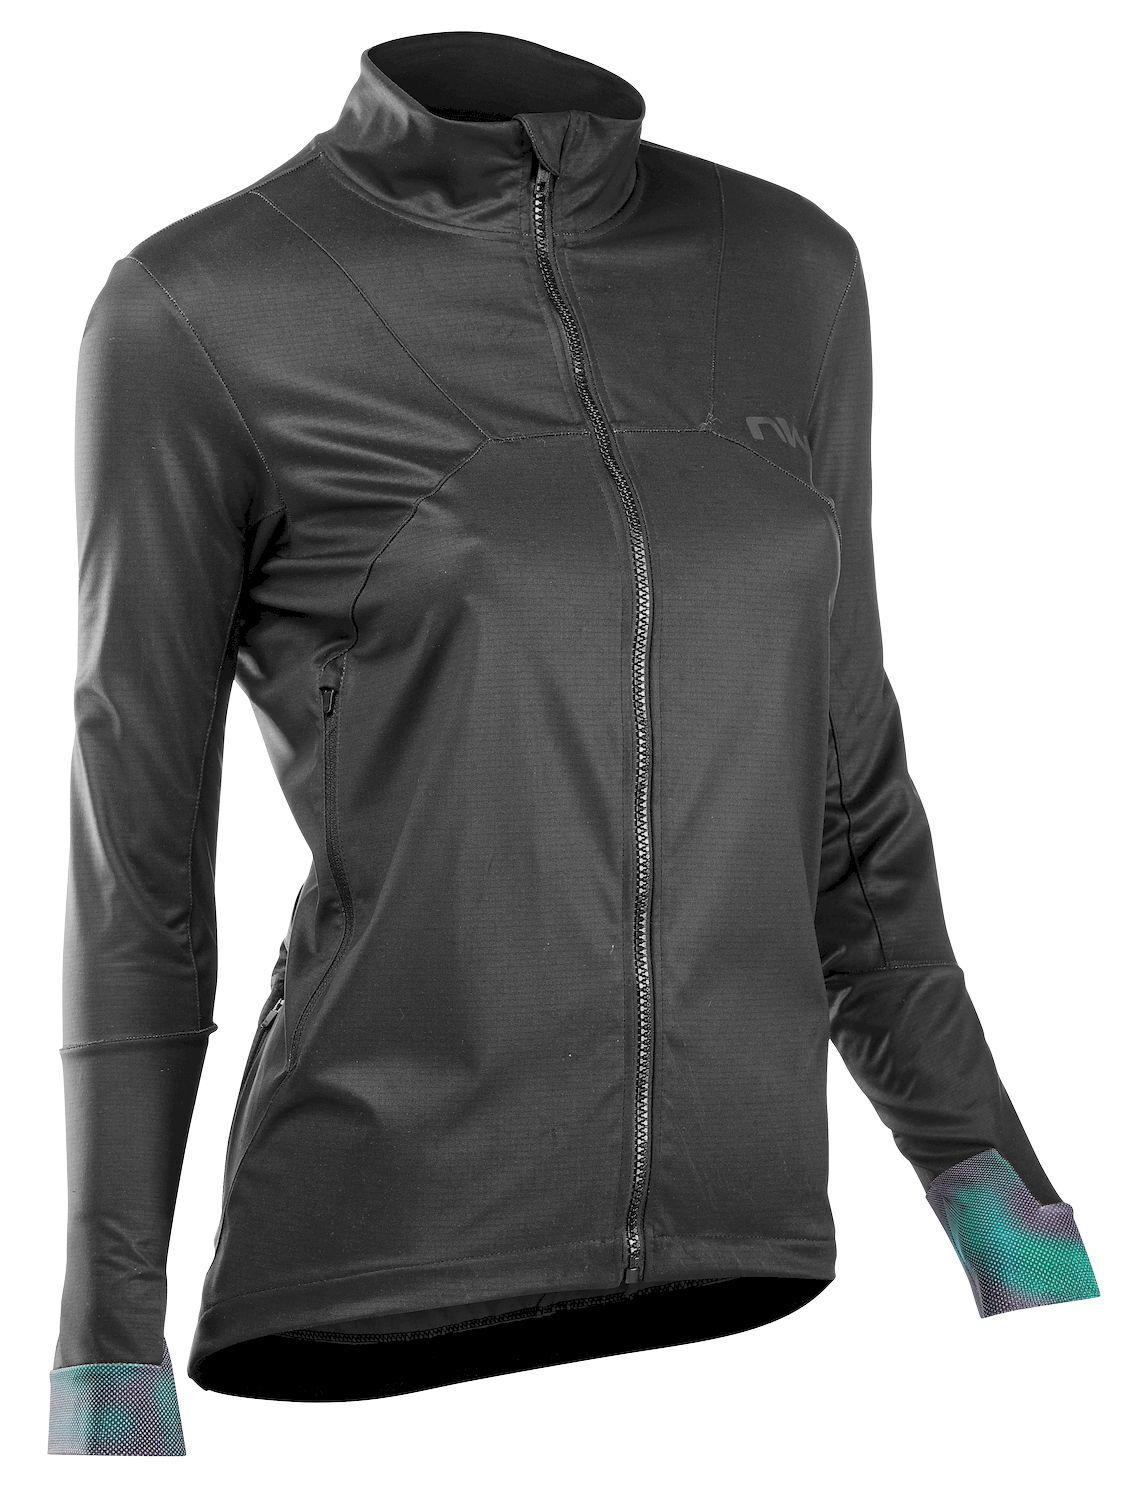 Northwave Extreme 2 Wmn Jacket - Giacca ciclismo - Donna